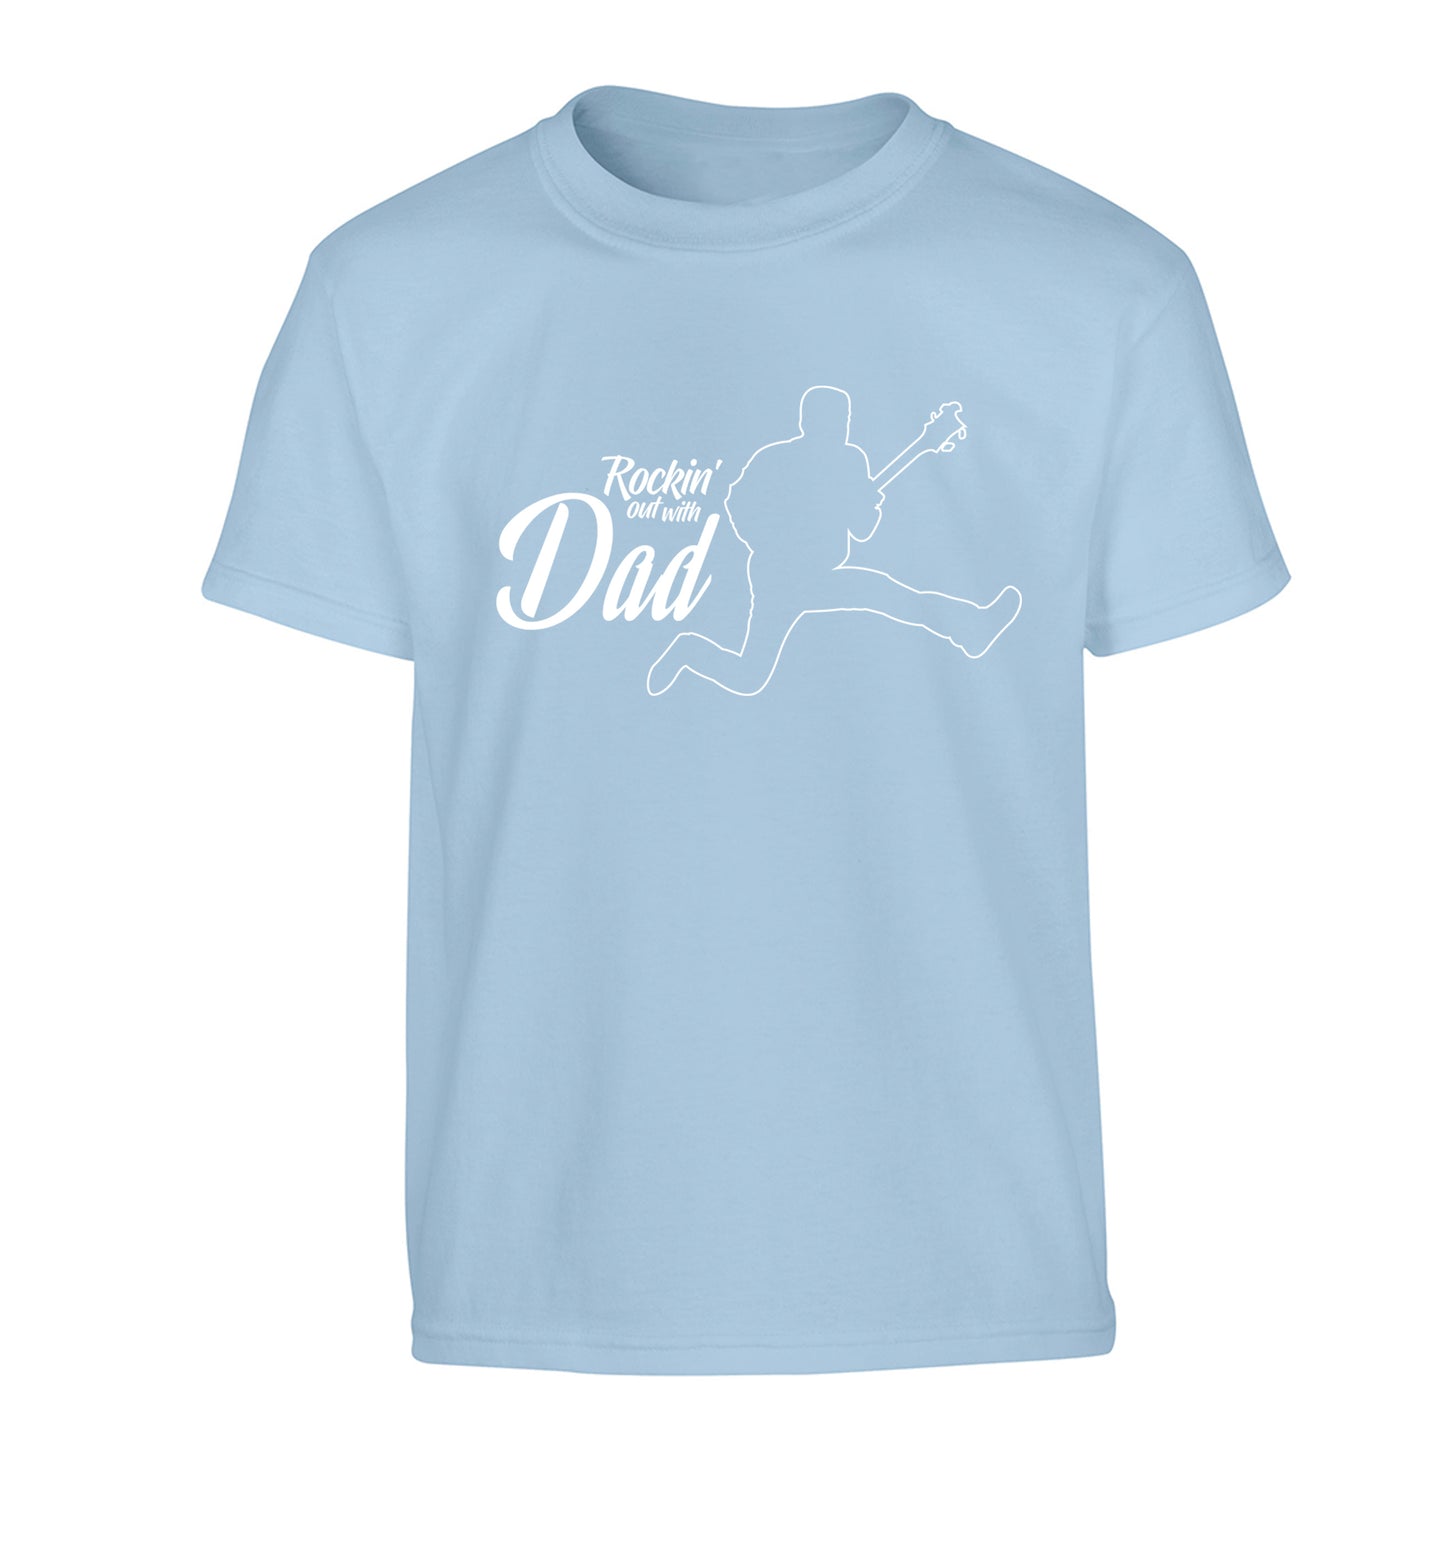 Rockin out with dad Children's light blue Tshirt 12-13 Years